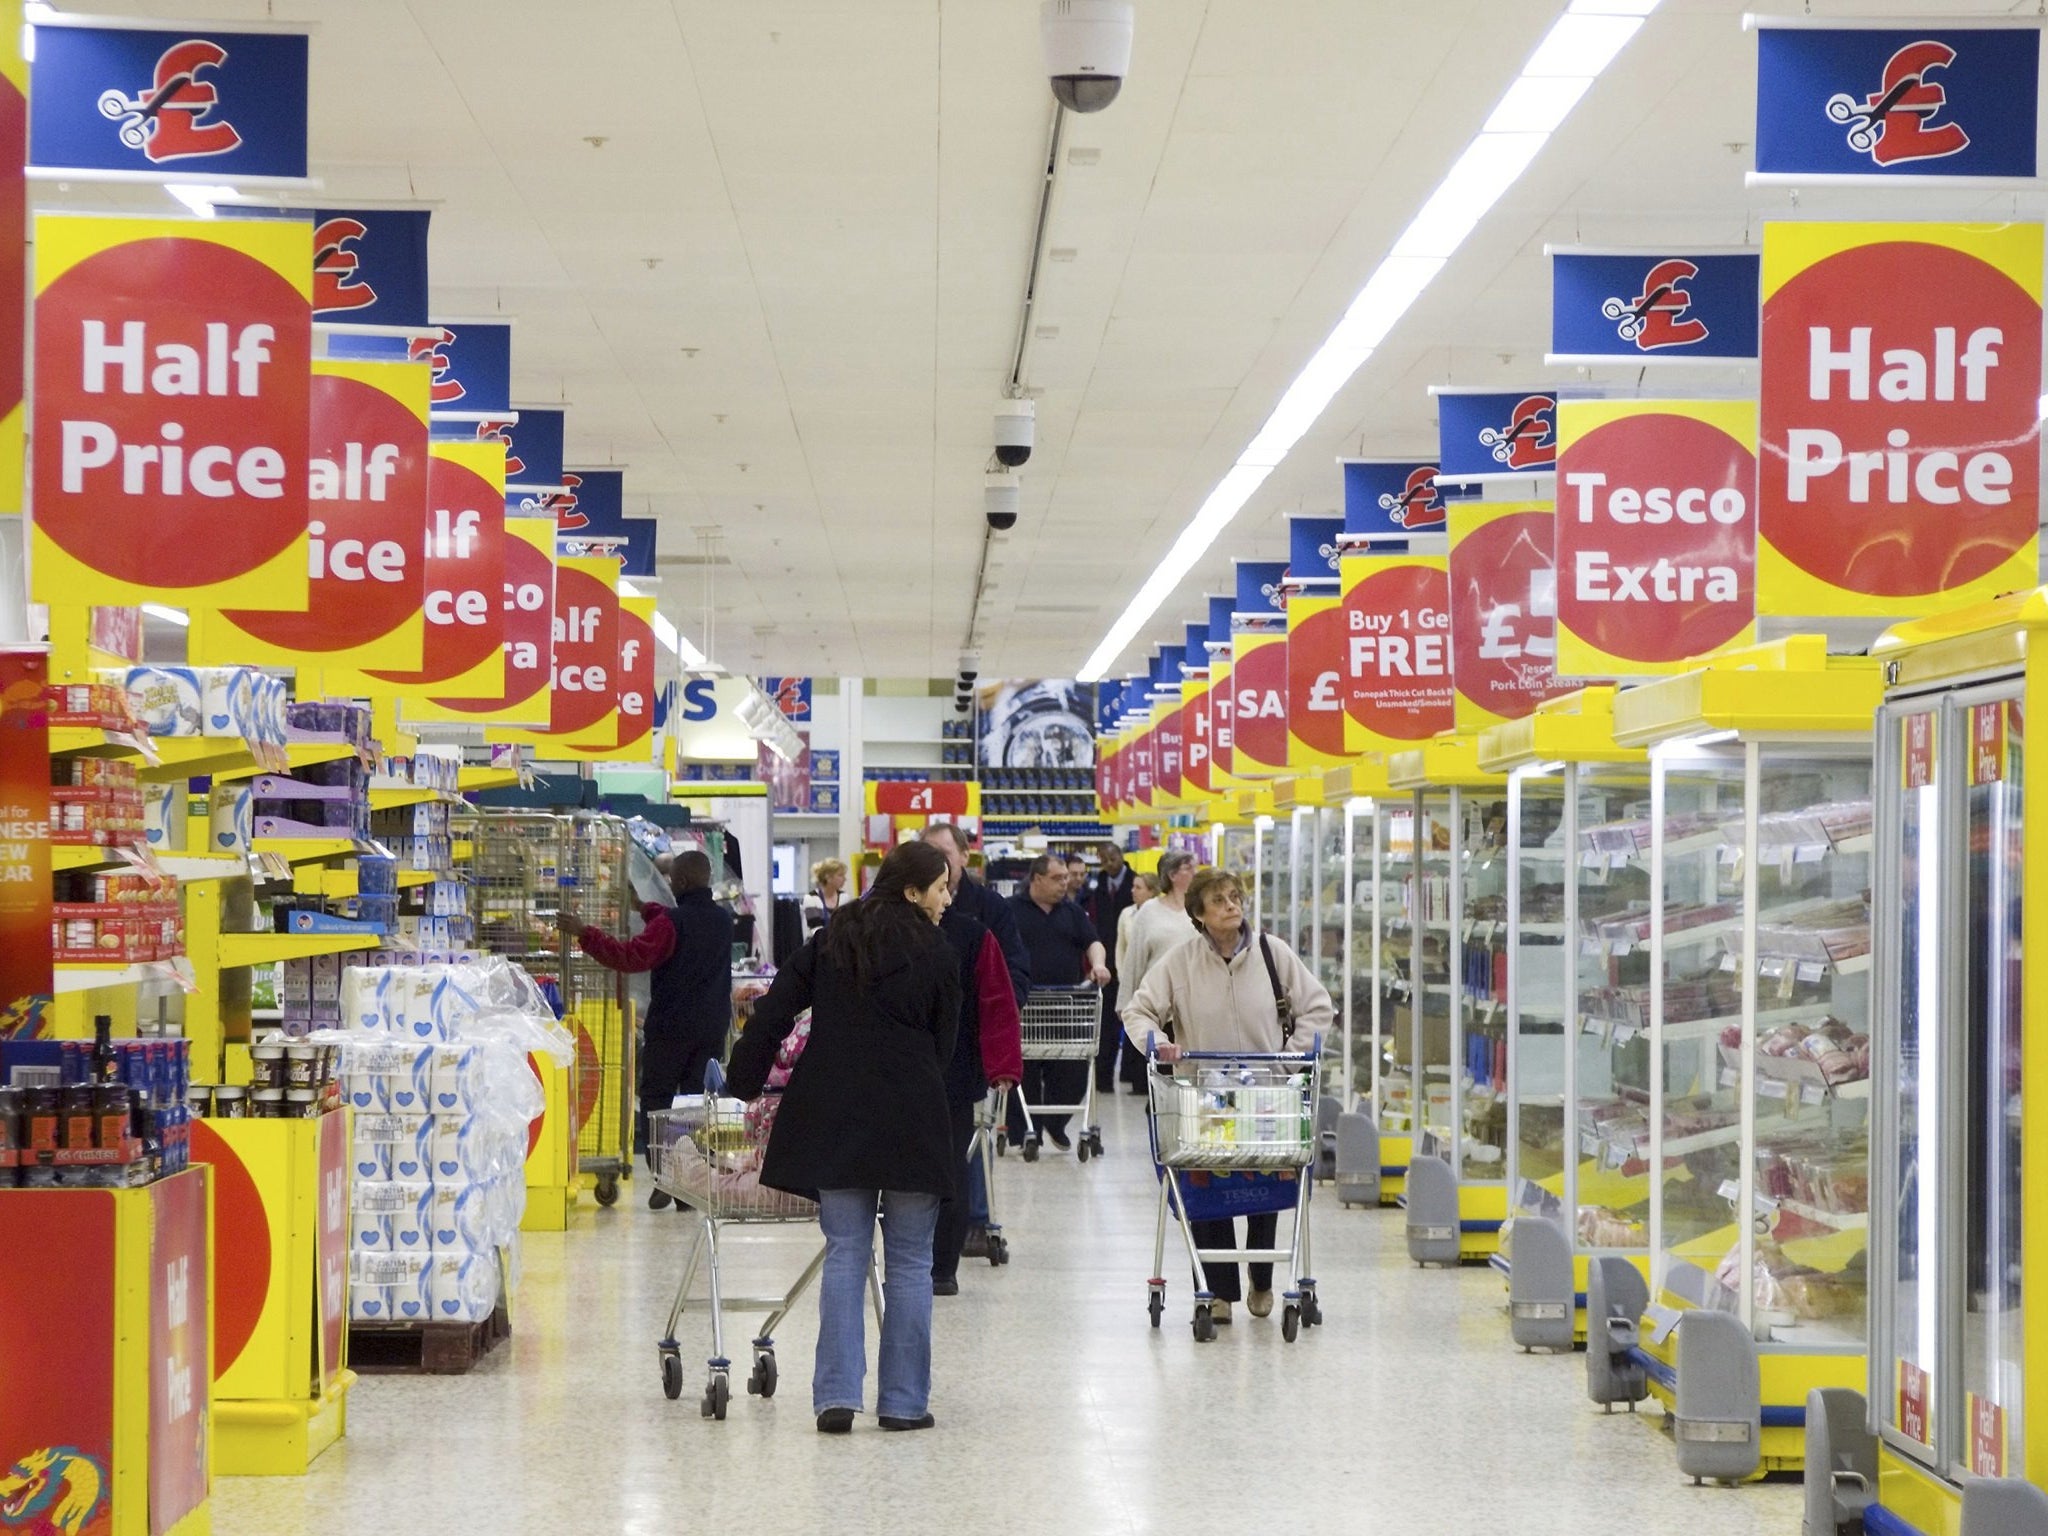 The incoming chief executive, Dave Lewis, is under pressure to find a long-term solution rather than a quick fix at Tesco